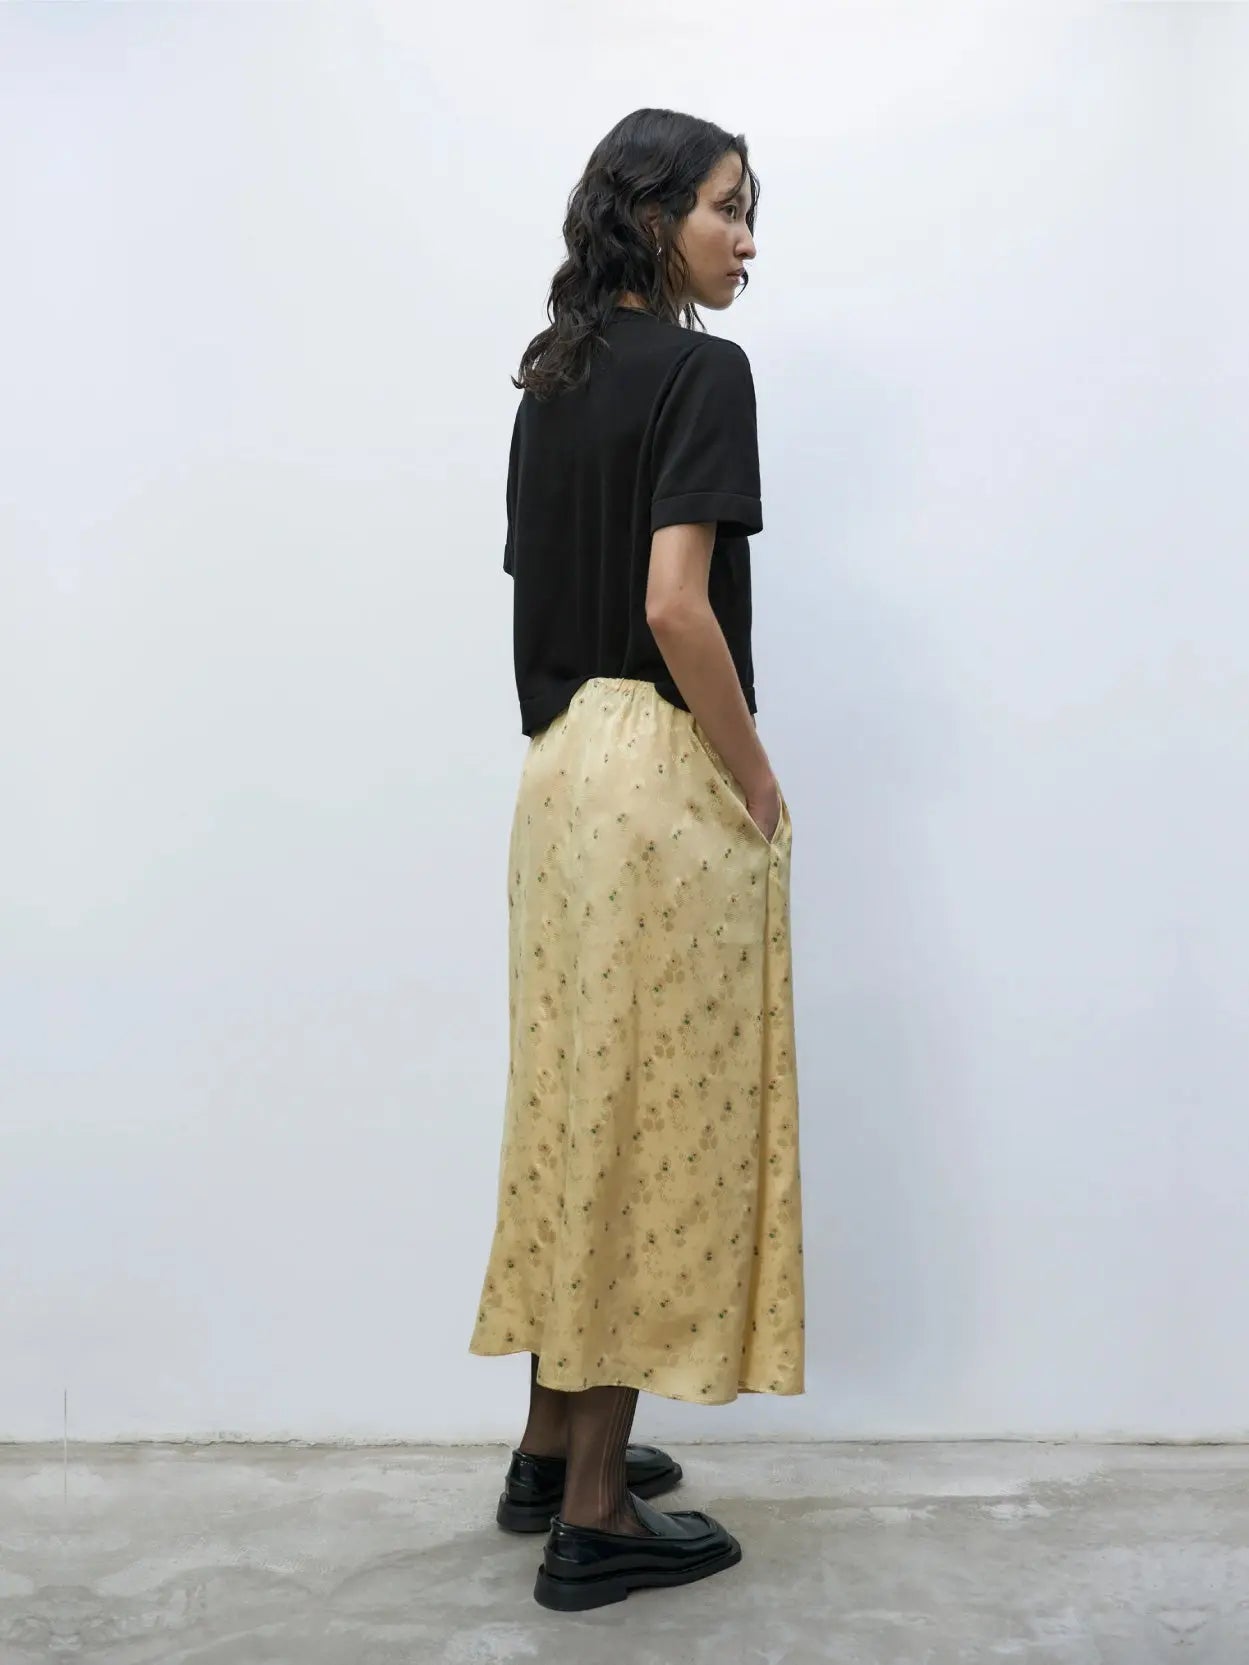 A woman with long wavy hair stands against a plain white wall. She is wearing a loose-fitting black T-shirt from BassalStore, a Silk Floral Skirt Jojoba from Cordera, and black loafers. Her expression is neutral, and her hands are relaxed at her sides.